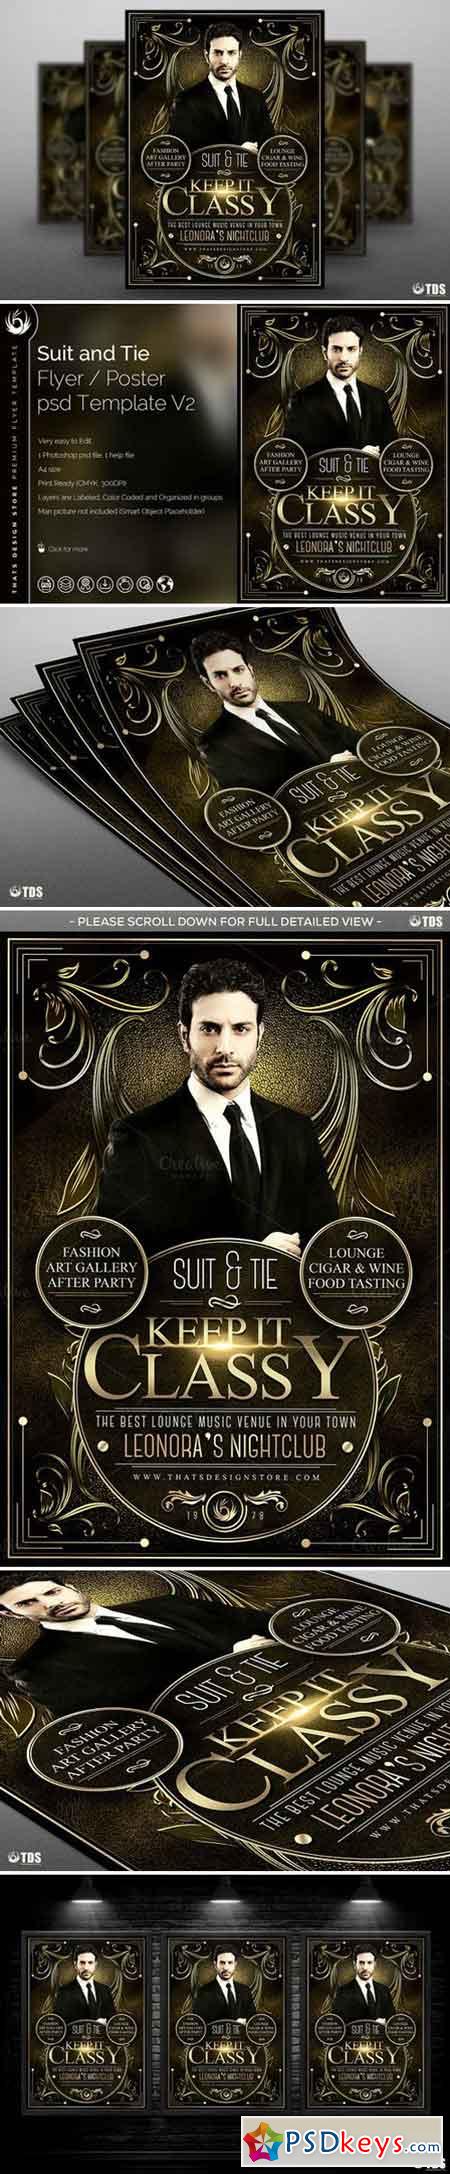 Suit and Tie Flyer Template V2 566254